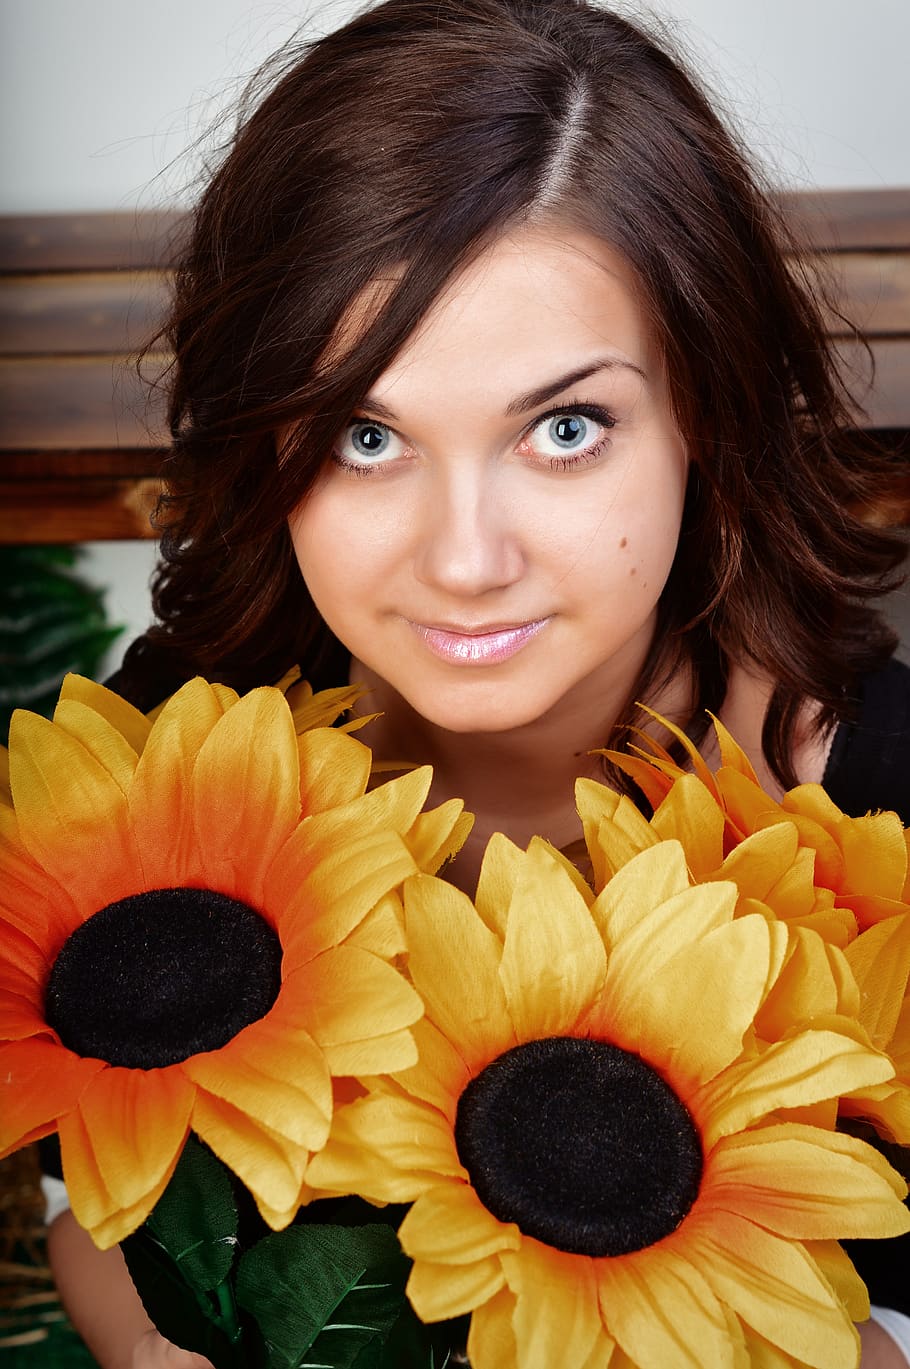 sunflowers, girl in the sunflowers, beautiful, blue-eyed, blue eyes, model, girl, portrait, view, woman